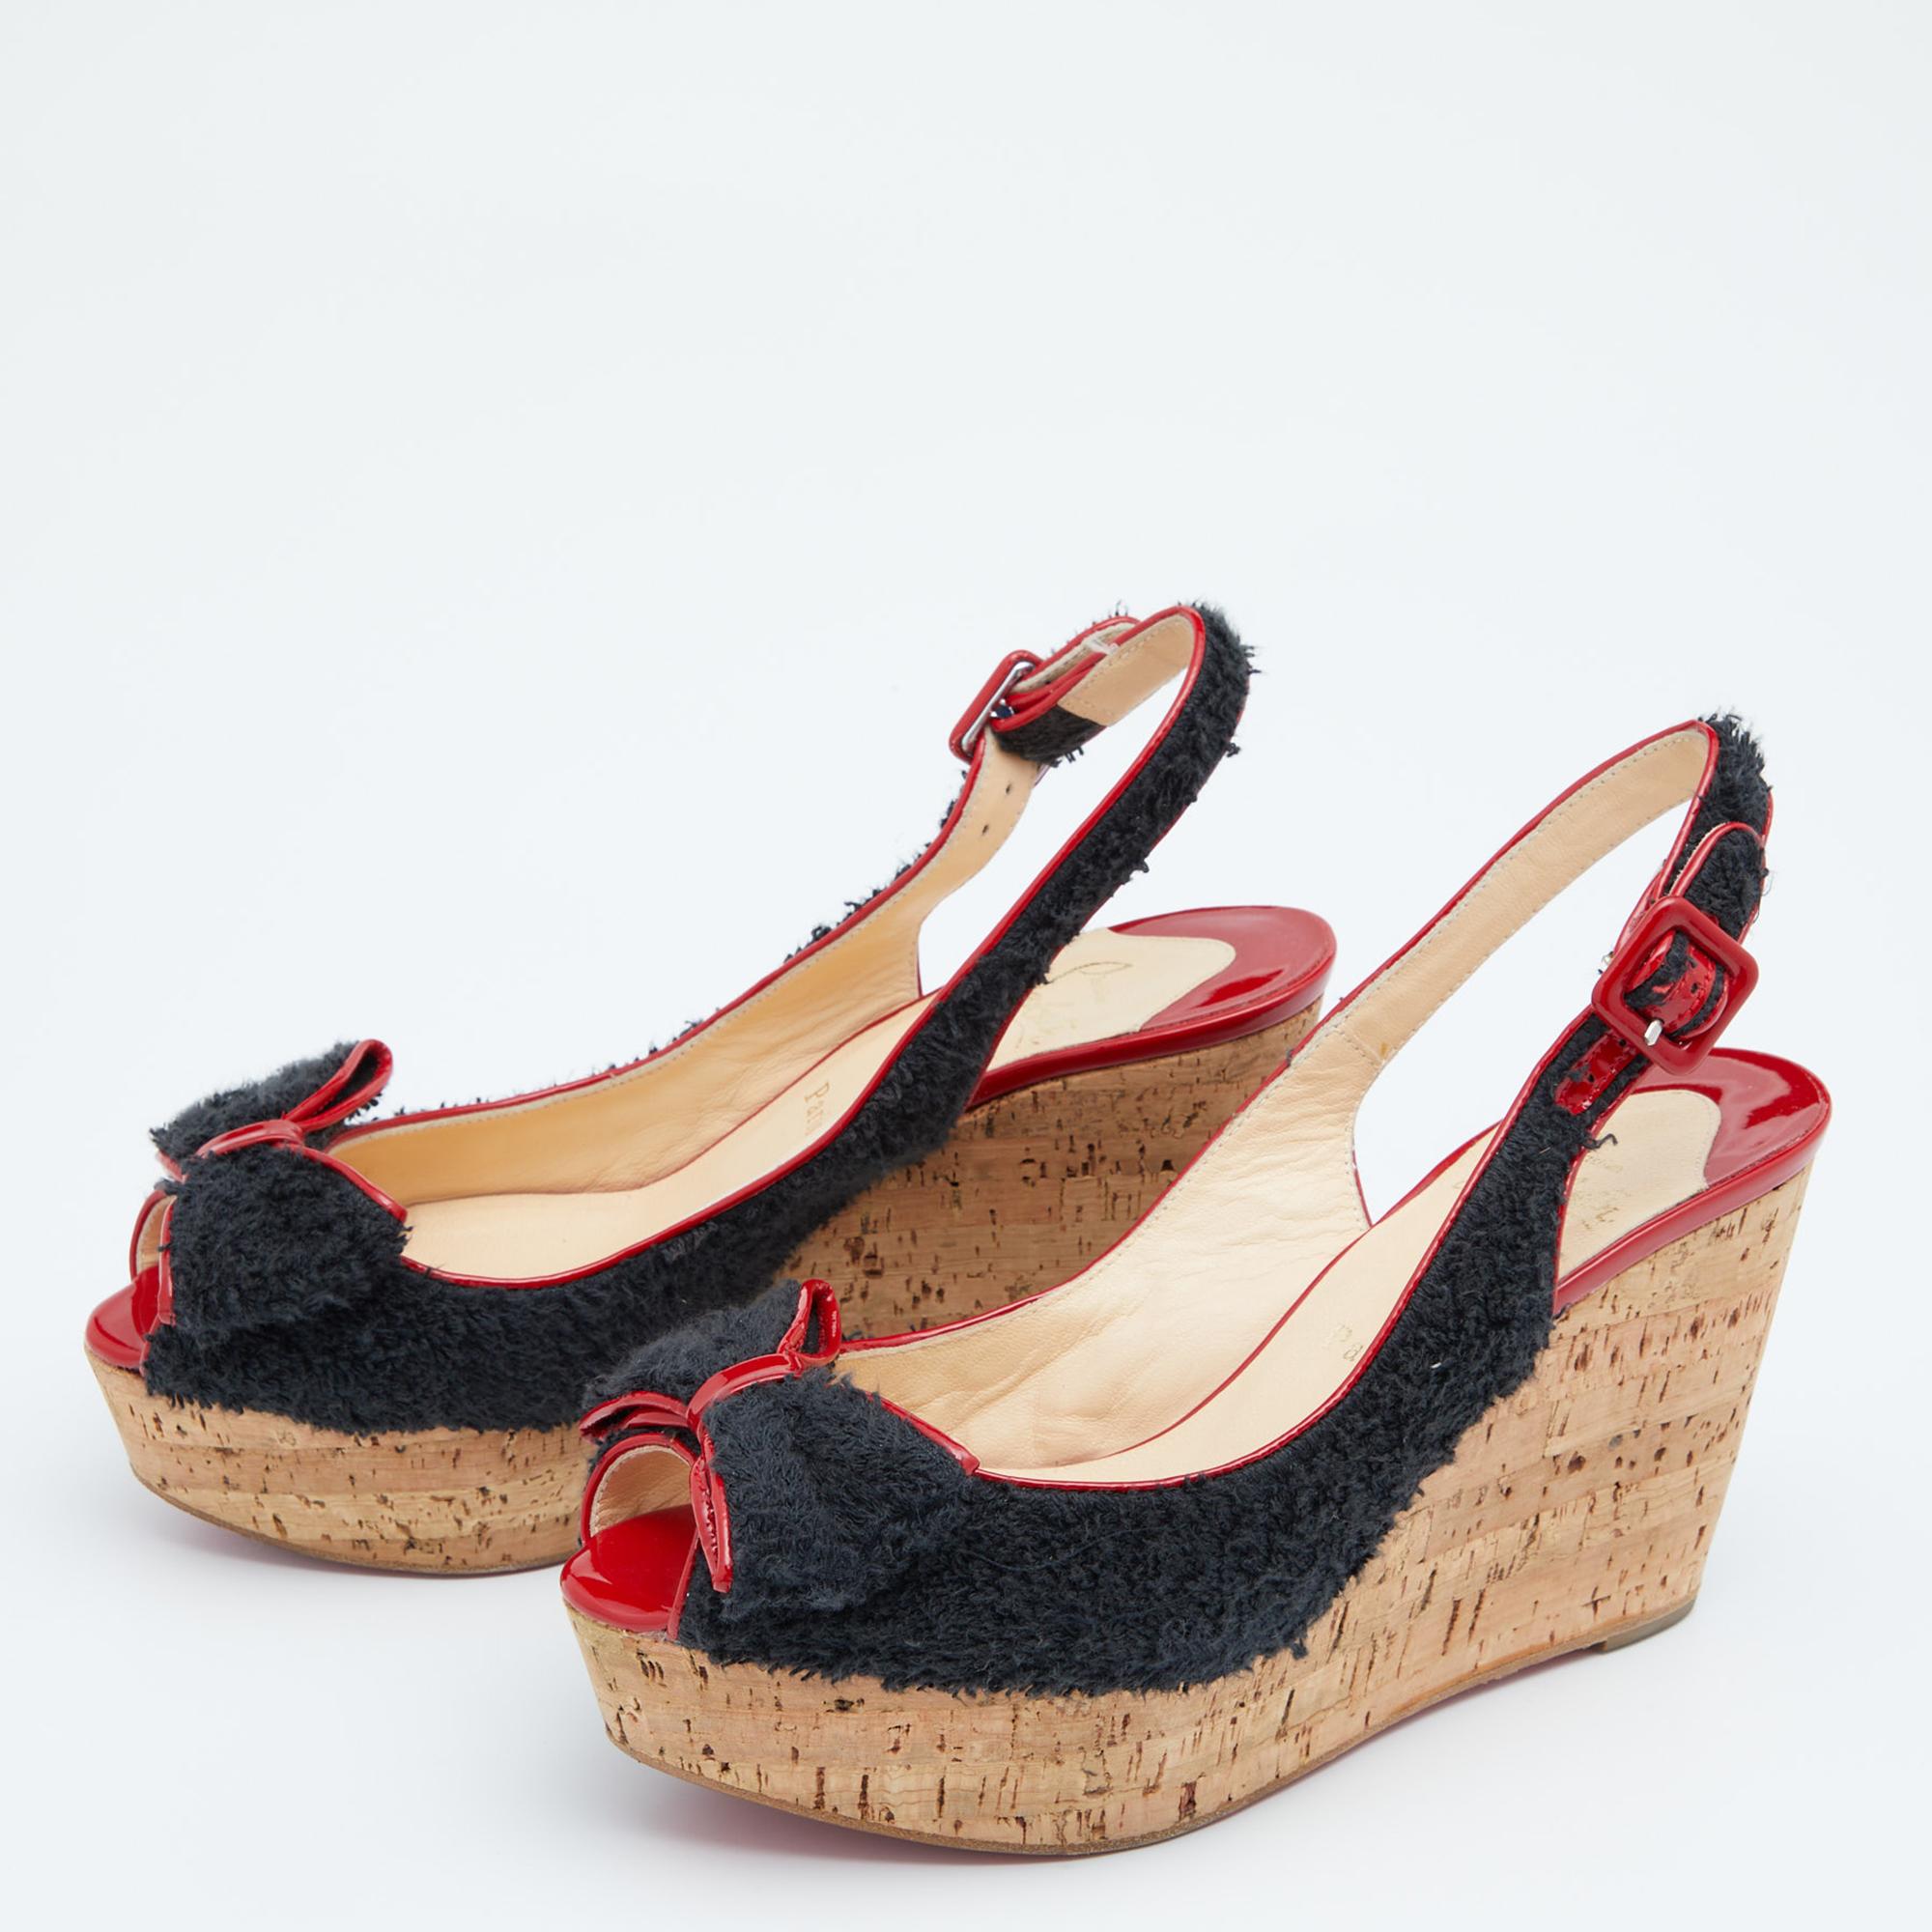 Women's Christian Louboutin Black/Red Fabric Trim Bow Cork Wedge Sandals Size 38.5